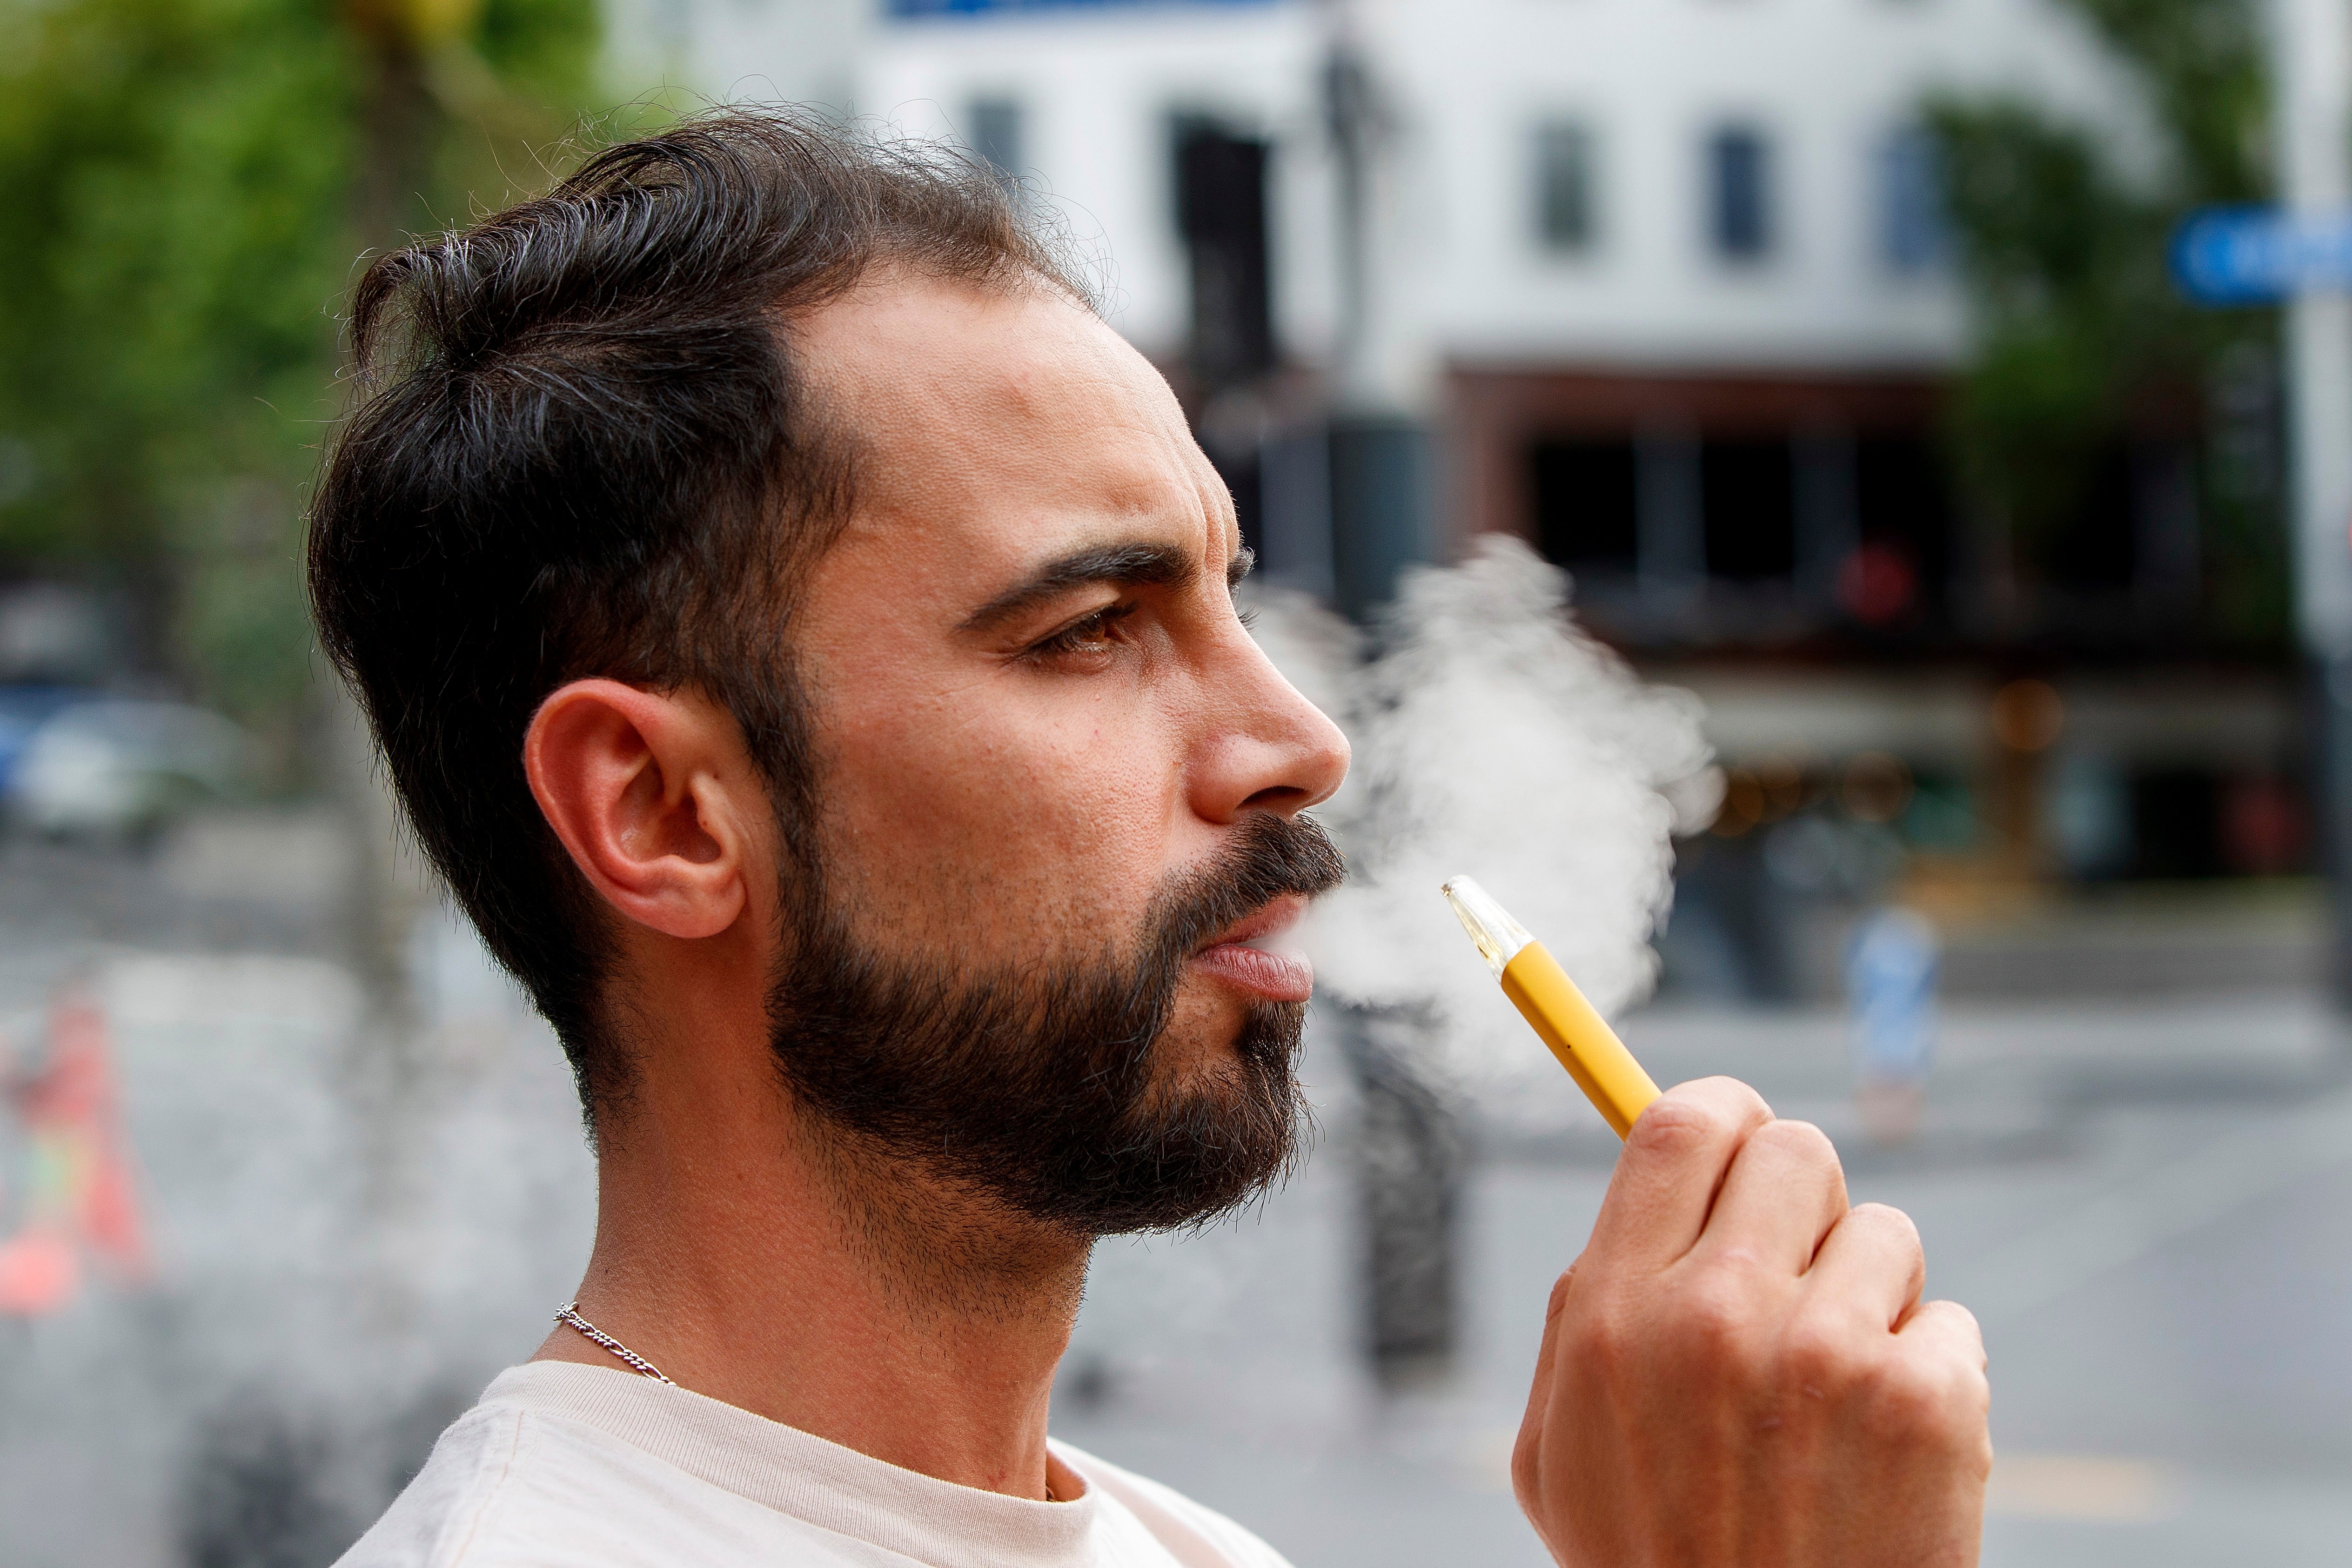 Vaping by a man in a street in Auckland, New Zealand on 9 December 2021